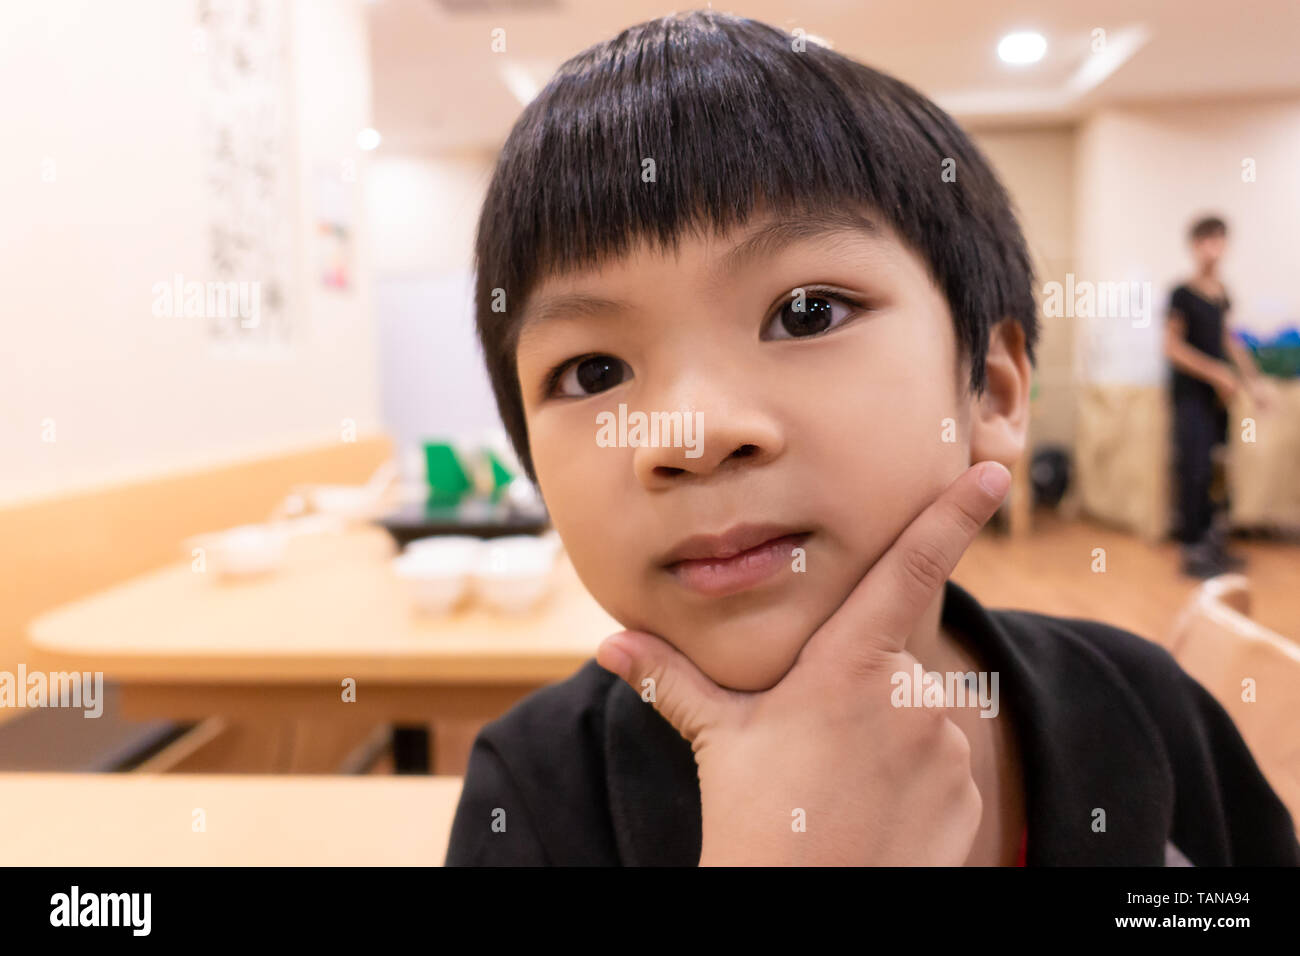 Hungry Funny child posing handsome waiting for food in restaurant. Stock Photo